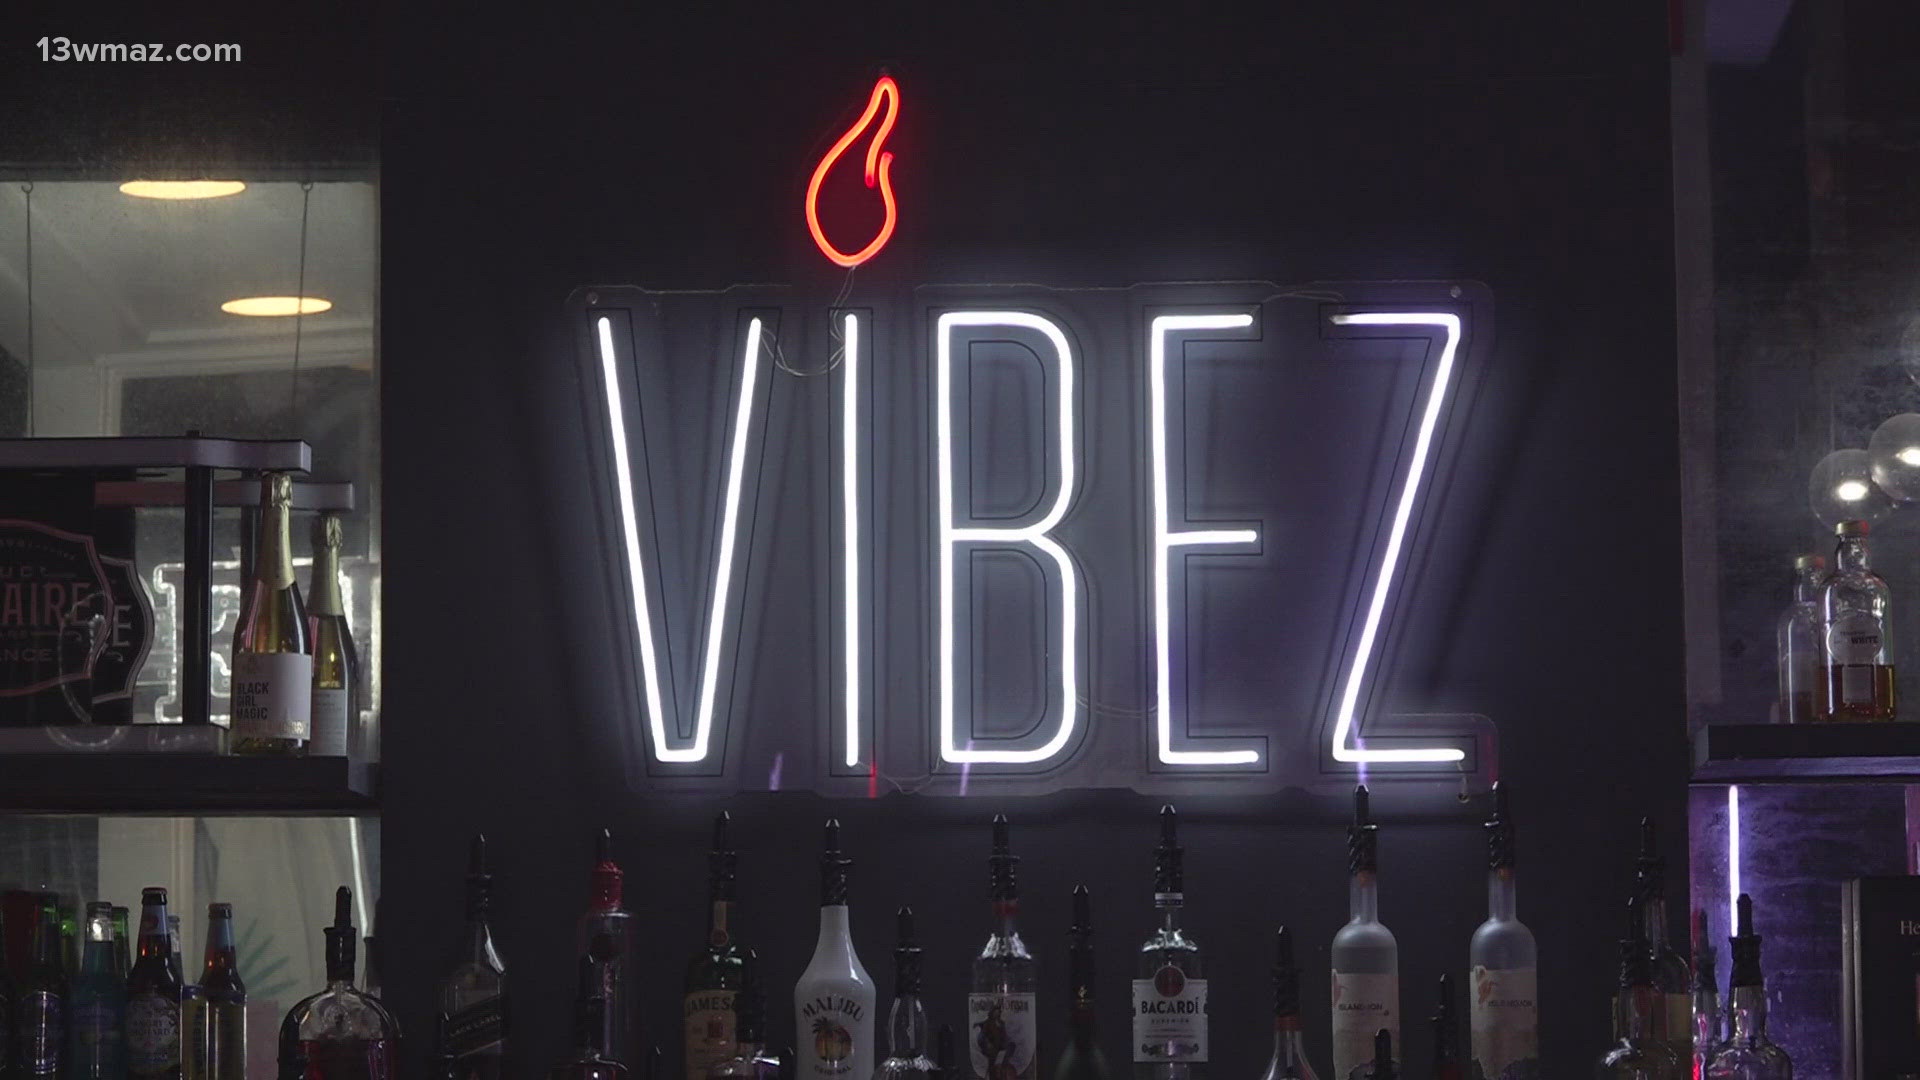 The downtown Macon restaurant Vibez is celebrating its three-year anniversary with 'Vibez Fest,' featuring a street food showdown and multiple food trucks.